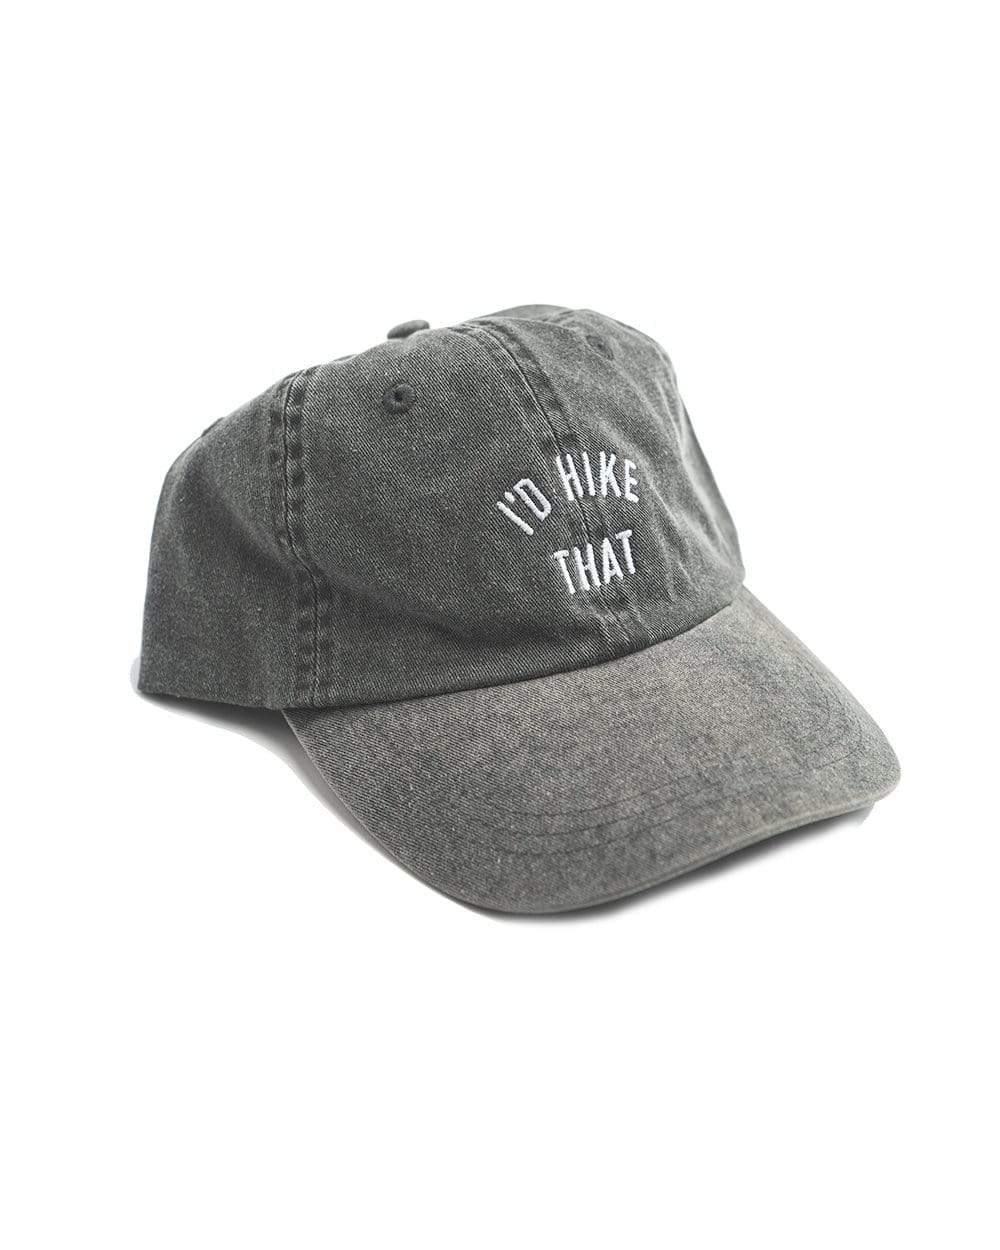 I'd Hike That Dad Hat | Charcoal Gray - Keep Nature Wild